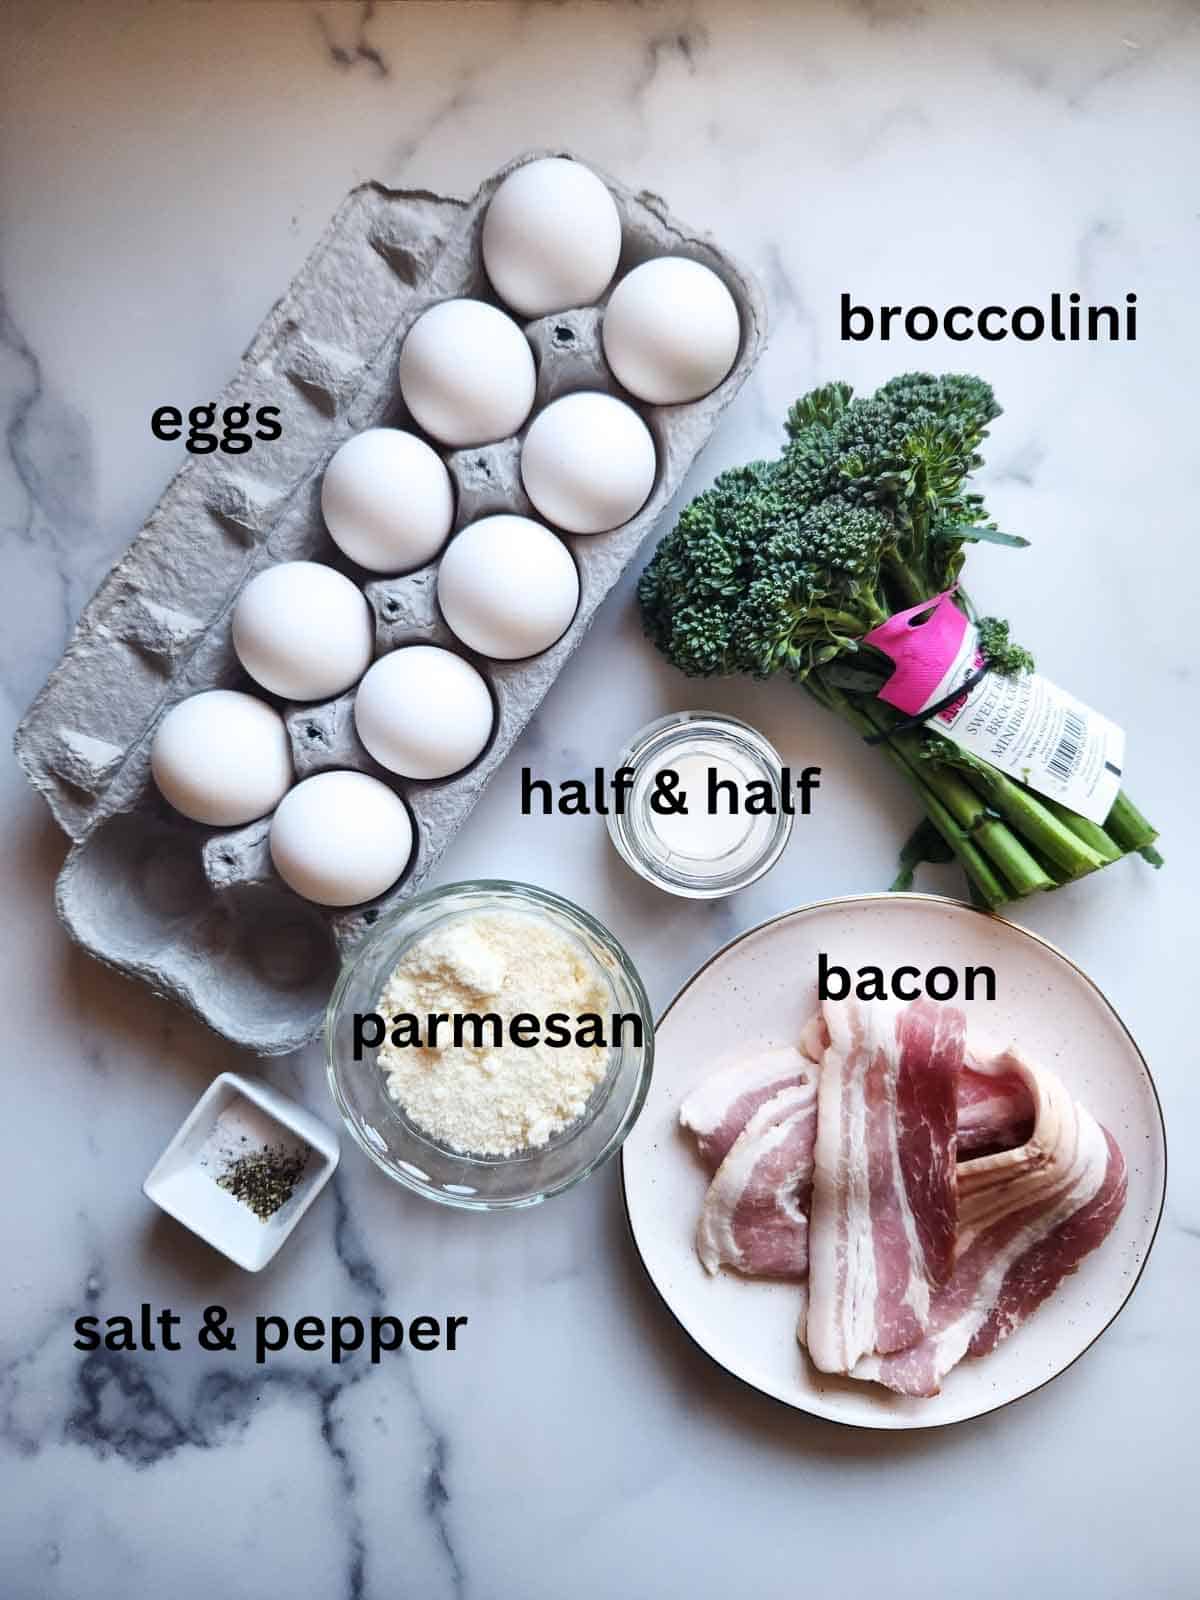 Overhead view of broccolini frittata ingredients on white marble.